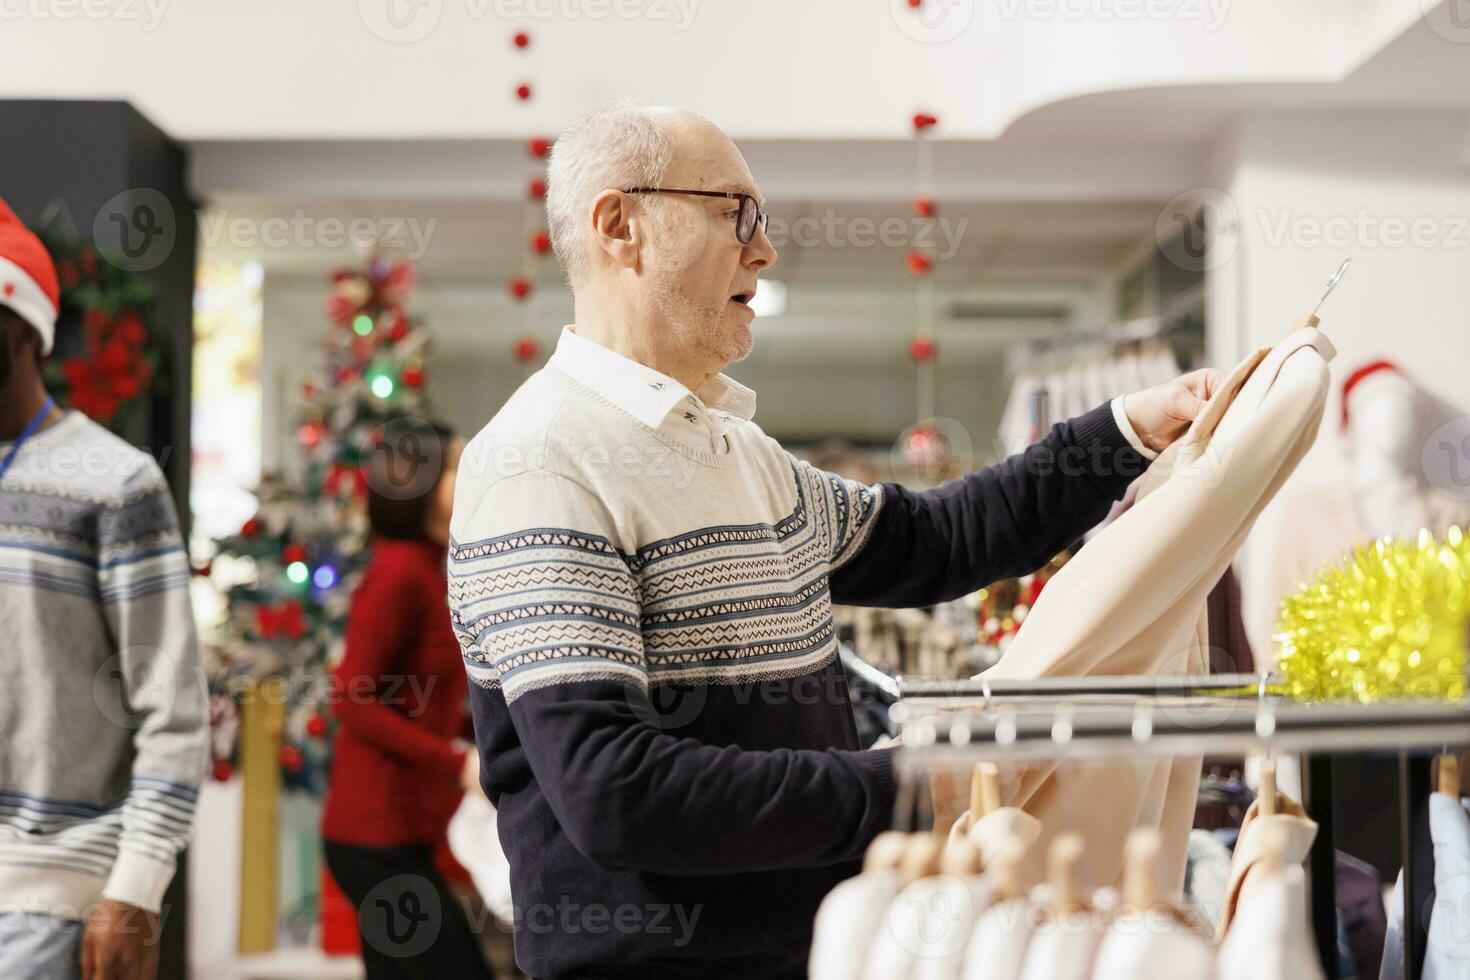 Senior person looks at clothes fabric in clothing store with festive ornaments, looking for christmas gifts and seasonal dinner outfit. Shopper searching for items on promotional sales. photo